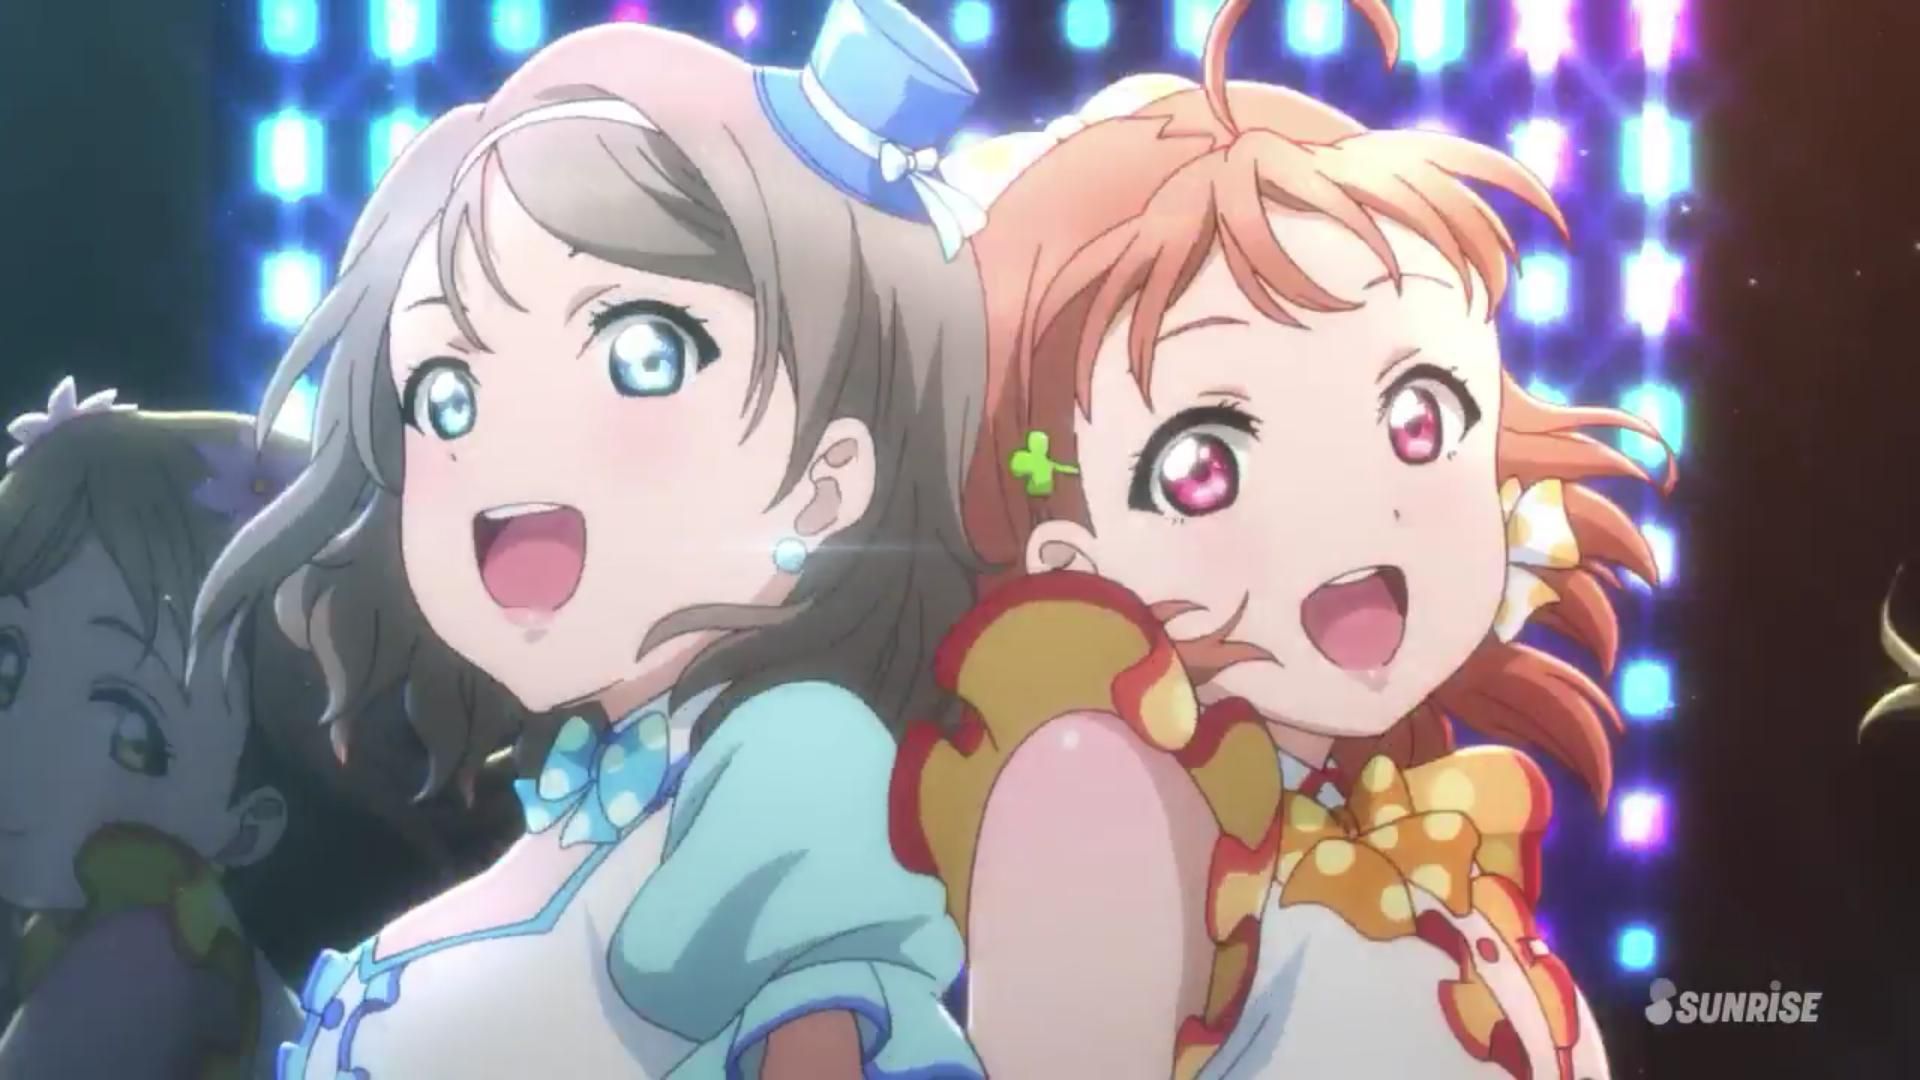 [Image] "love live! Sunshine "1000 songs she bend was its cute scene image competitions wwwwwwwwww 23